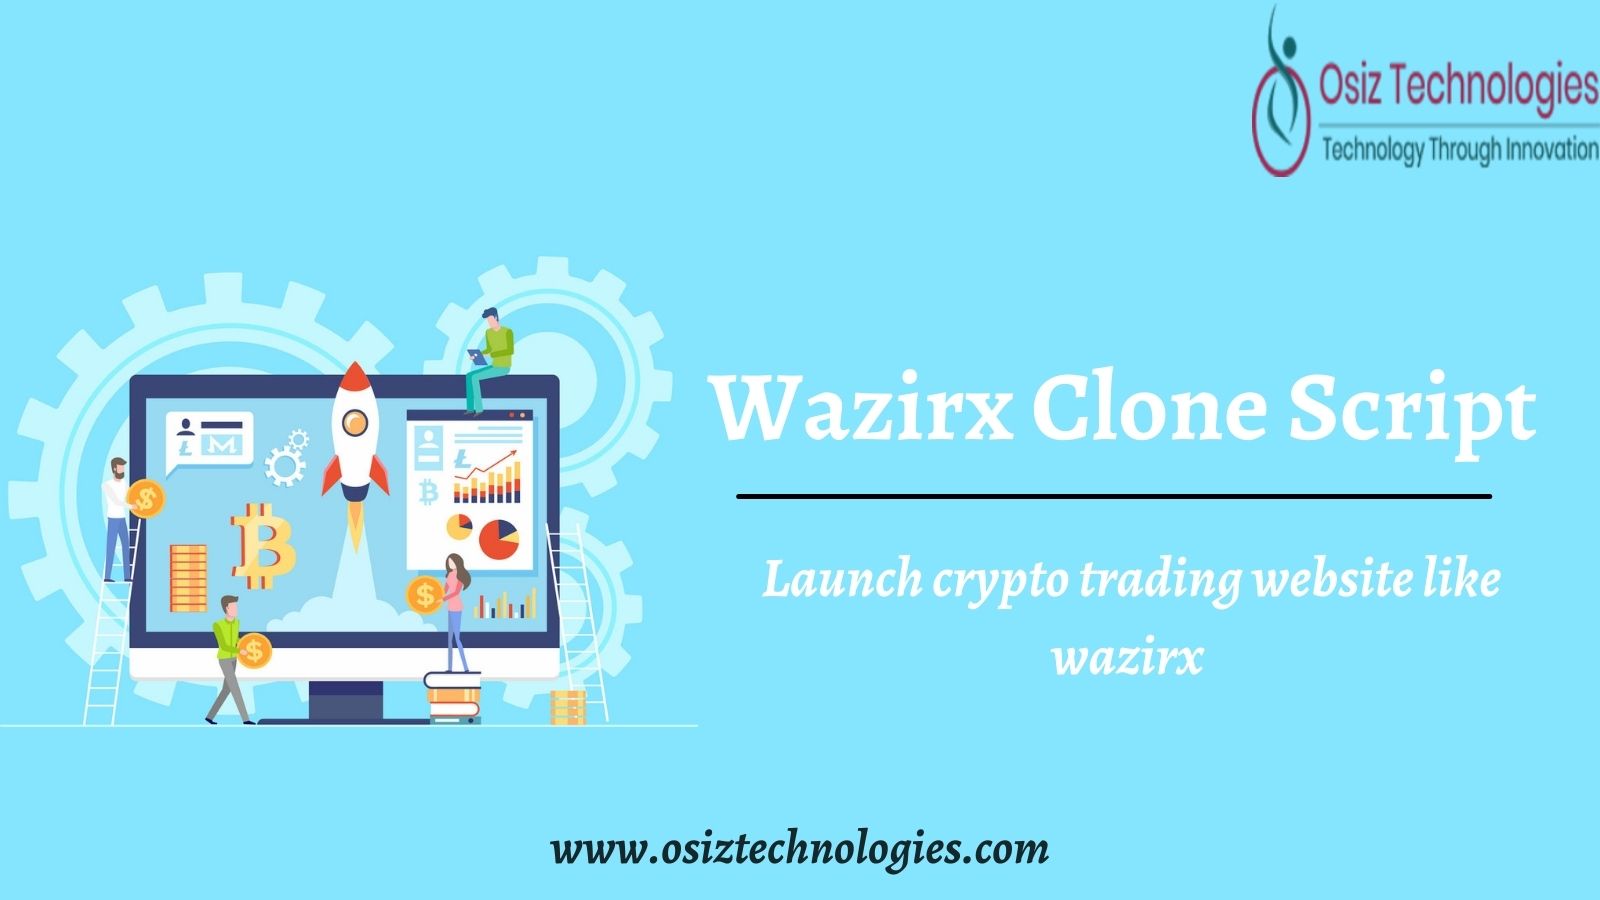 Article about To start your p2p crypto exchange like wazirx